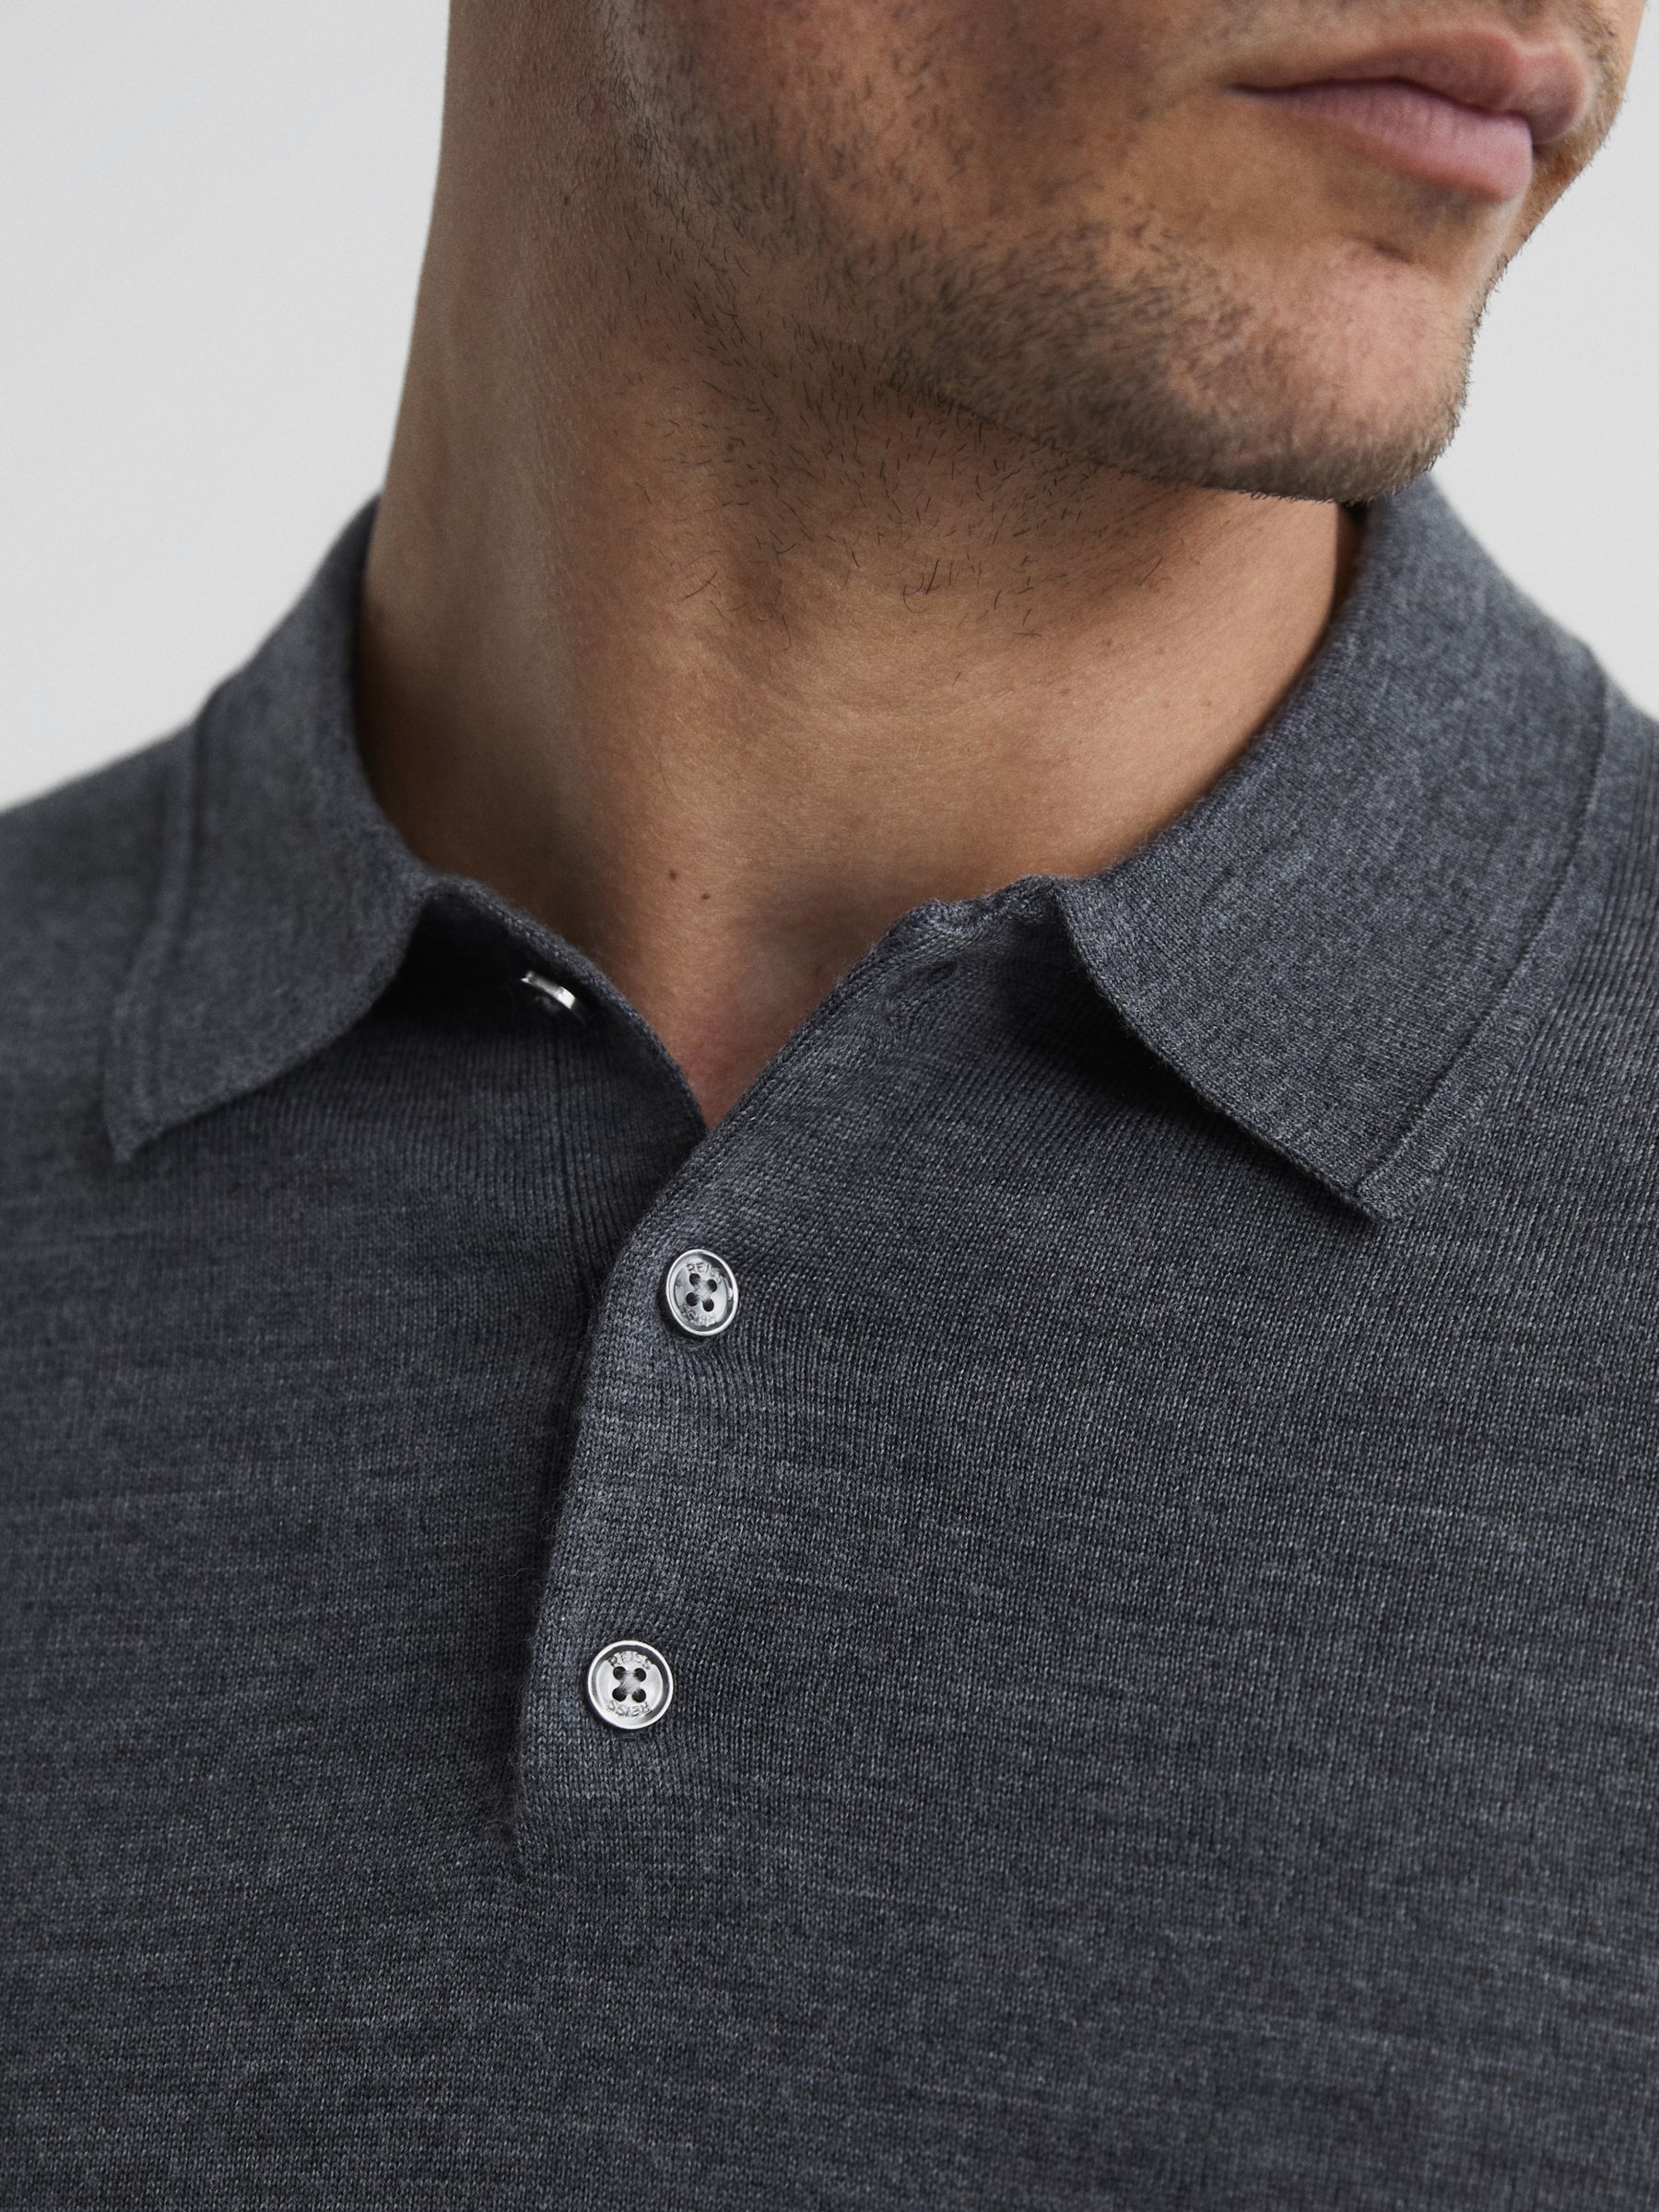 Wool Polo Sleeve Melange Lewis Partners & Reiss Knitted Trafford Grey Mid at Top, Long John